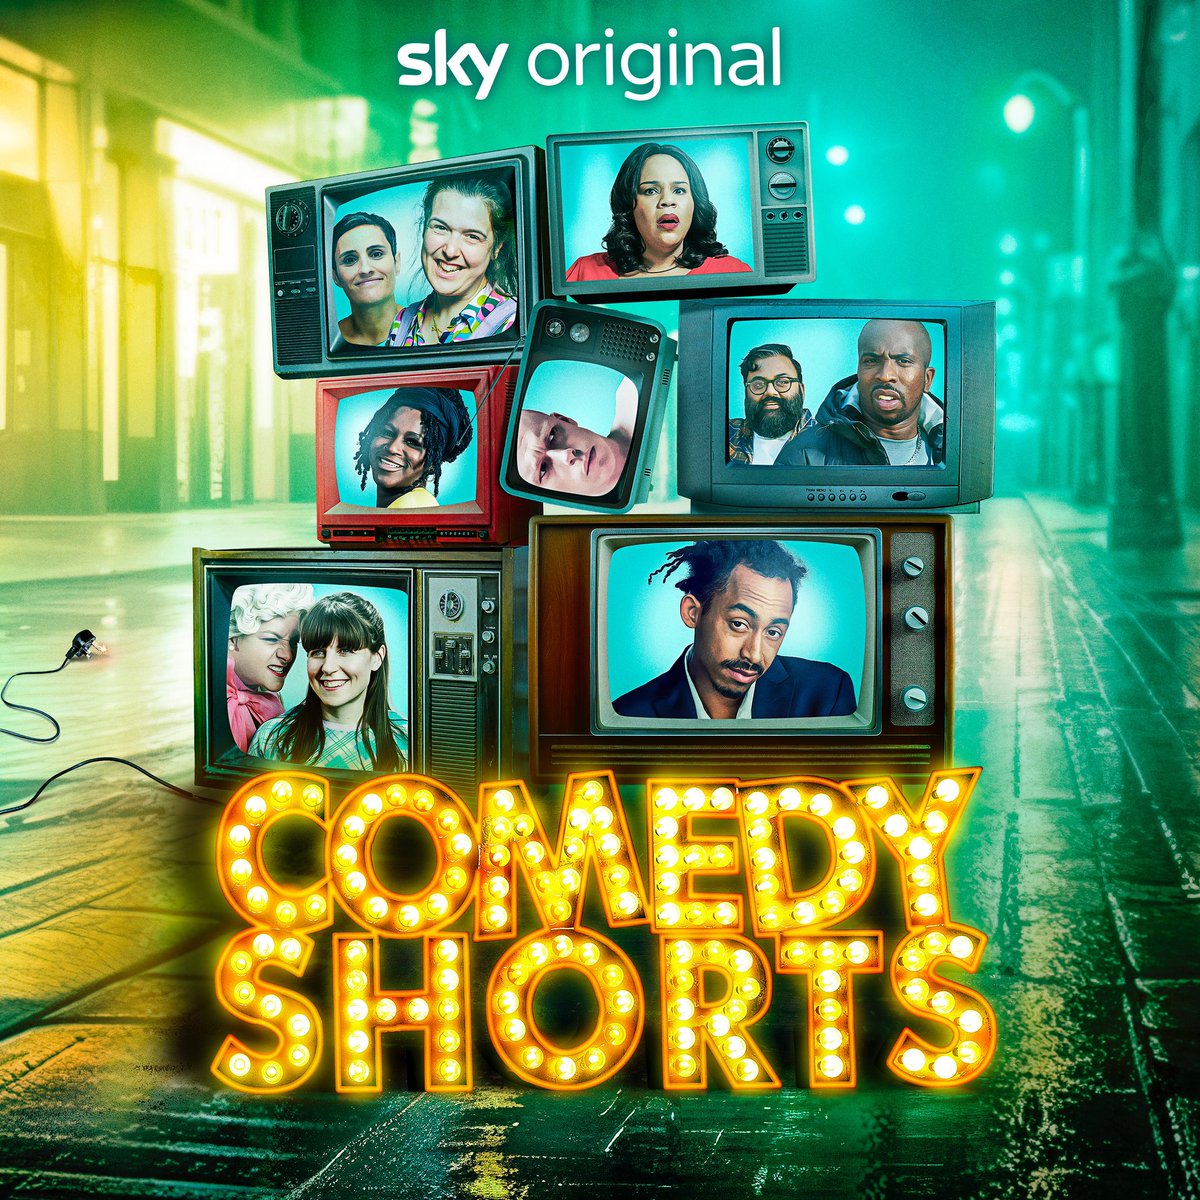 🙌🏼 Thursday 31st August at 11pm on Sky Arts 📺 They will be broadcast as a compilation on Sky Arts, with Lemons and Diane from Accounts being 4th and 5th. The compilation will be available on catch-up, and the individual shorts will be available On Demand from 1st September!